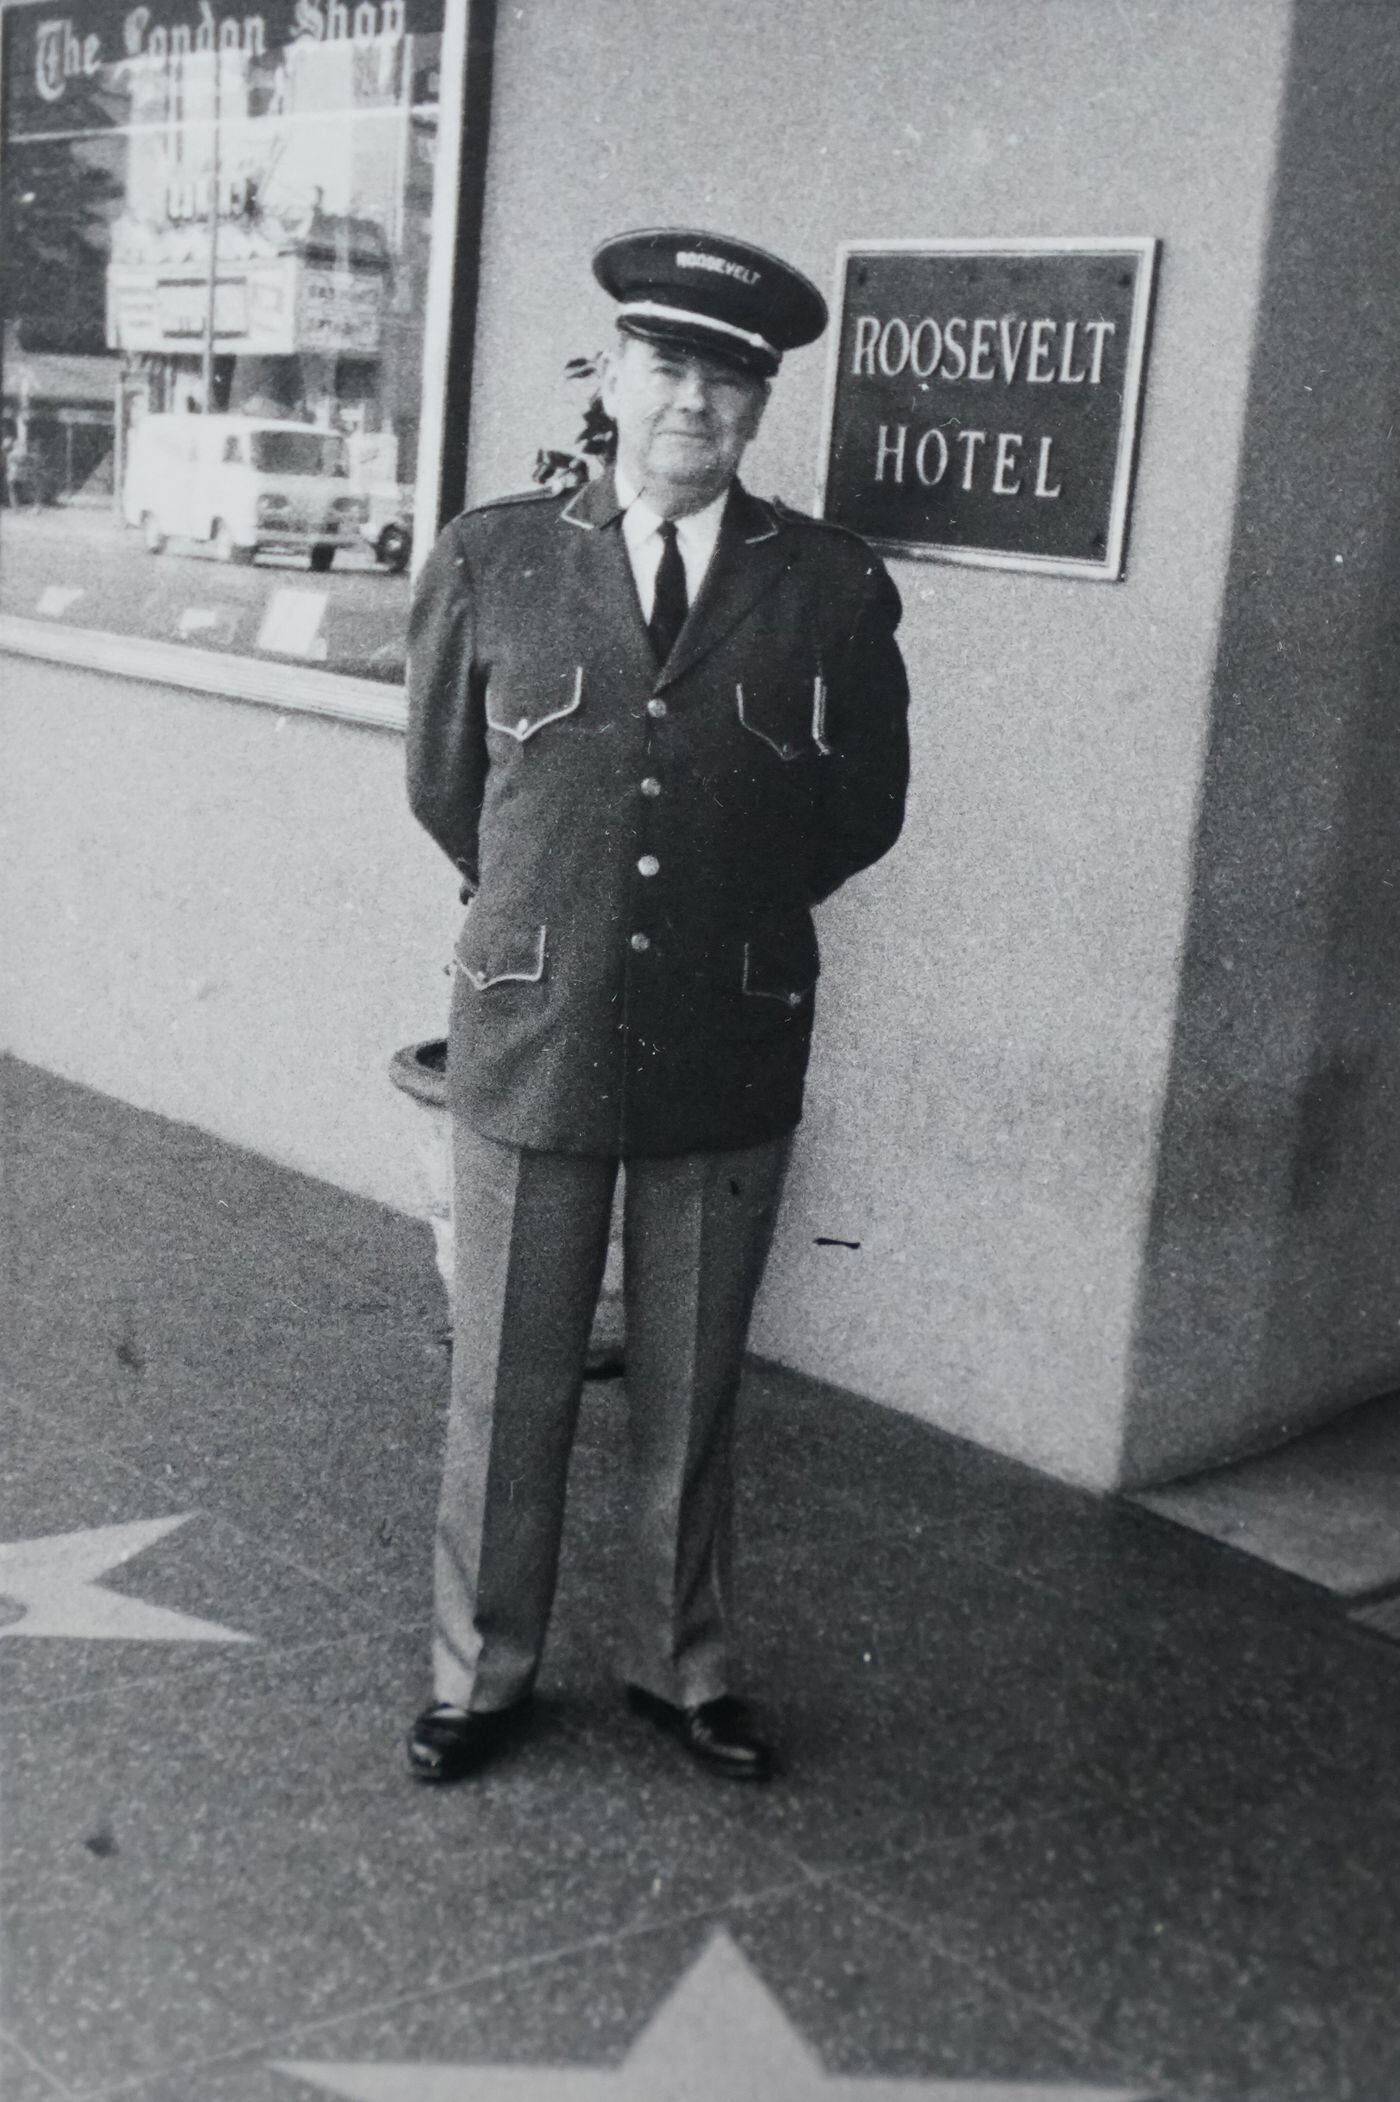 An older Richard Brian stands outside the Roosevelt Hotel in a picture taken not long before his retirement. The stars at his feet date the photo to between 1960, when the Hollywood Walk of Fame appeared, and 1969, when he retired.